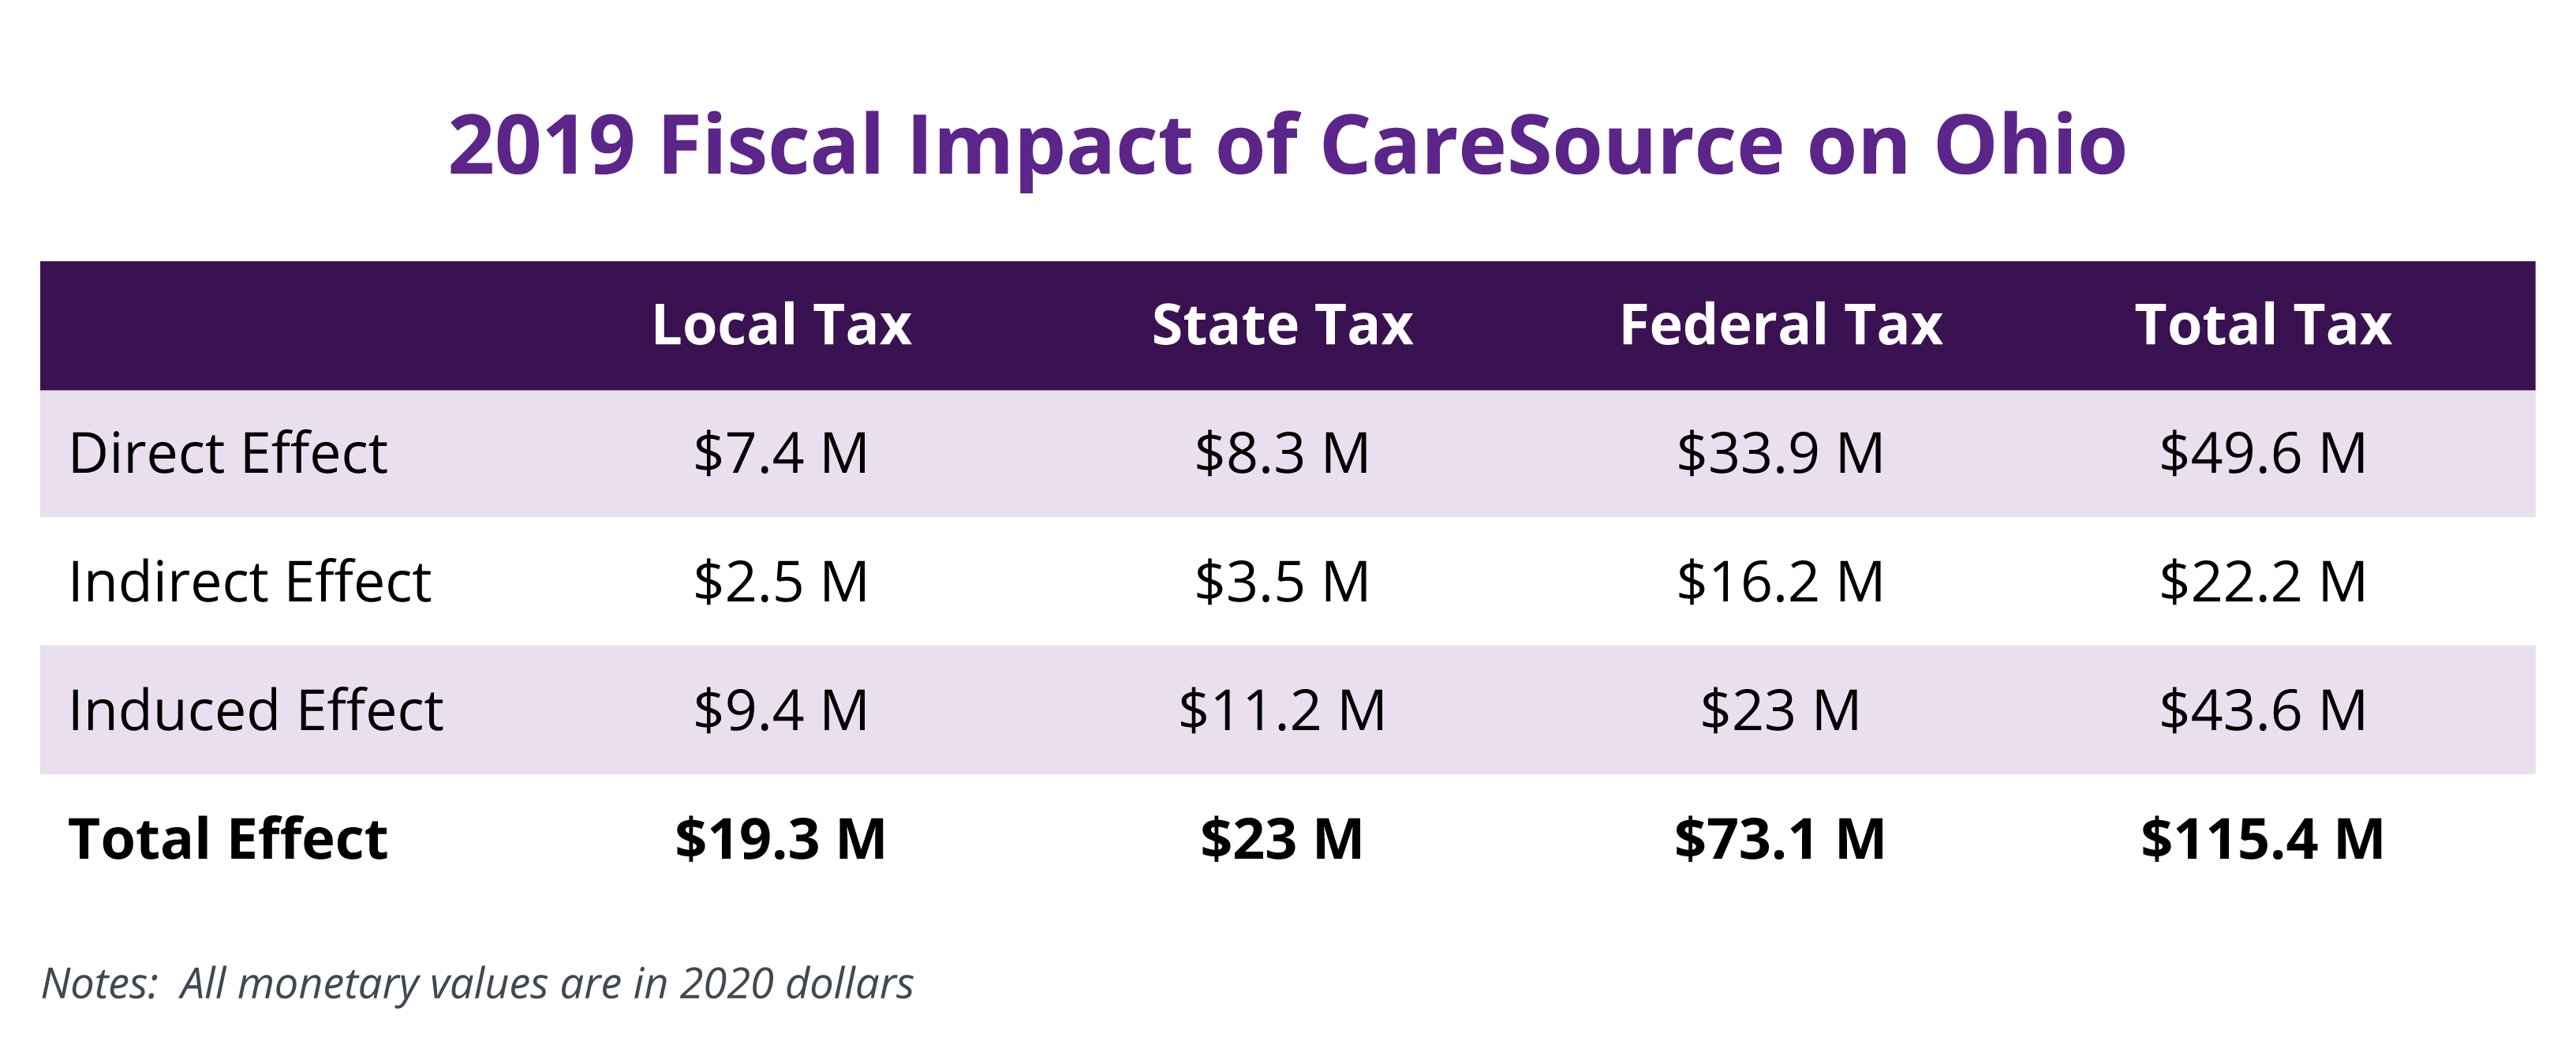 Caresource tax information amerigroup real solutions star plus